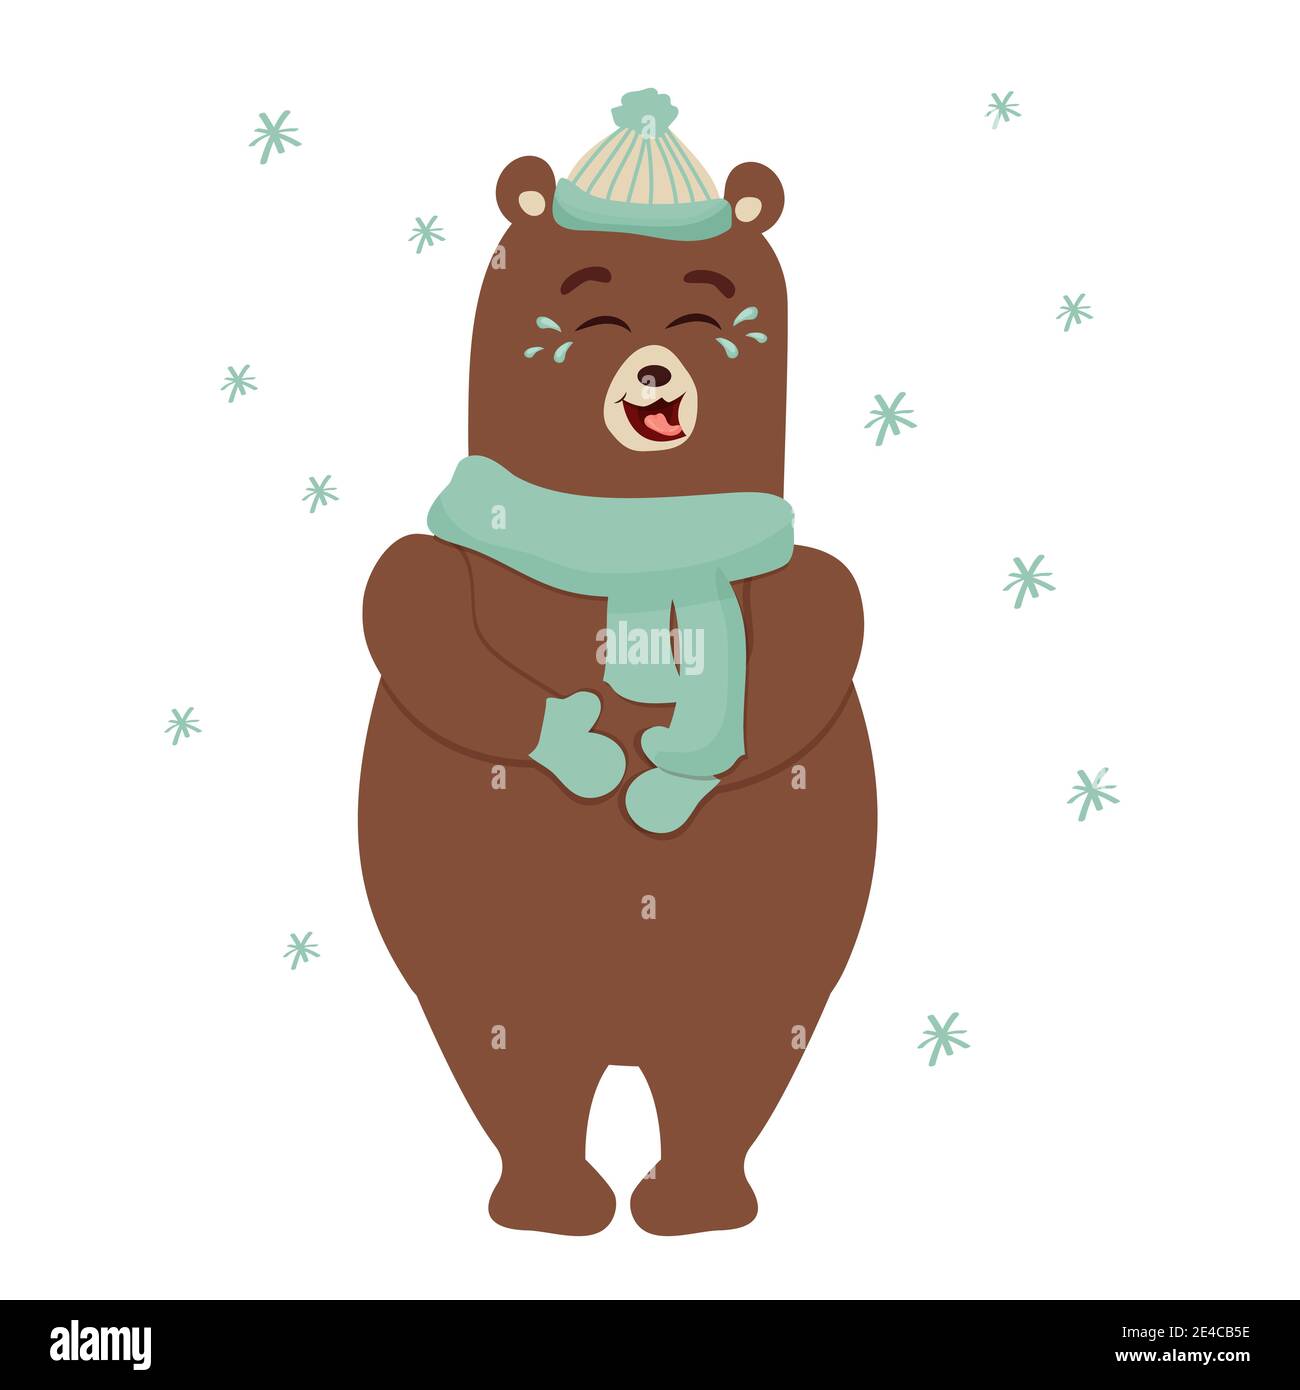 Brown bear laughing with tears, emotional character full length with snowflakes, hat and scarf isolated on white background. Funny, comic animal. Vect Stock Vector